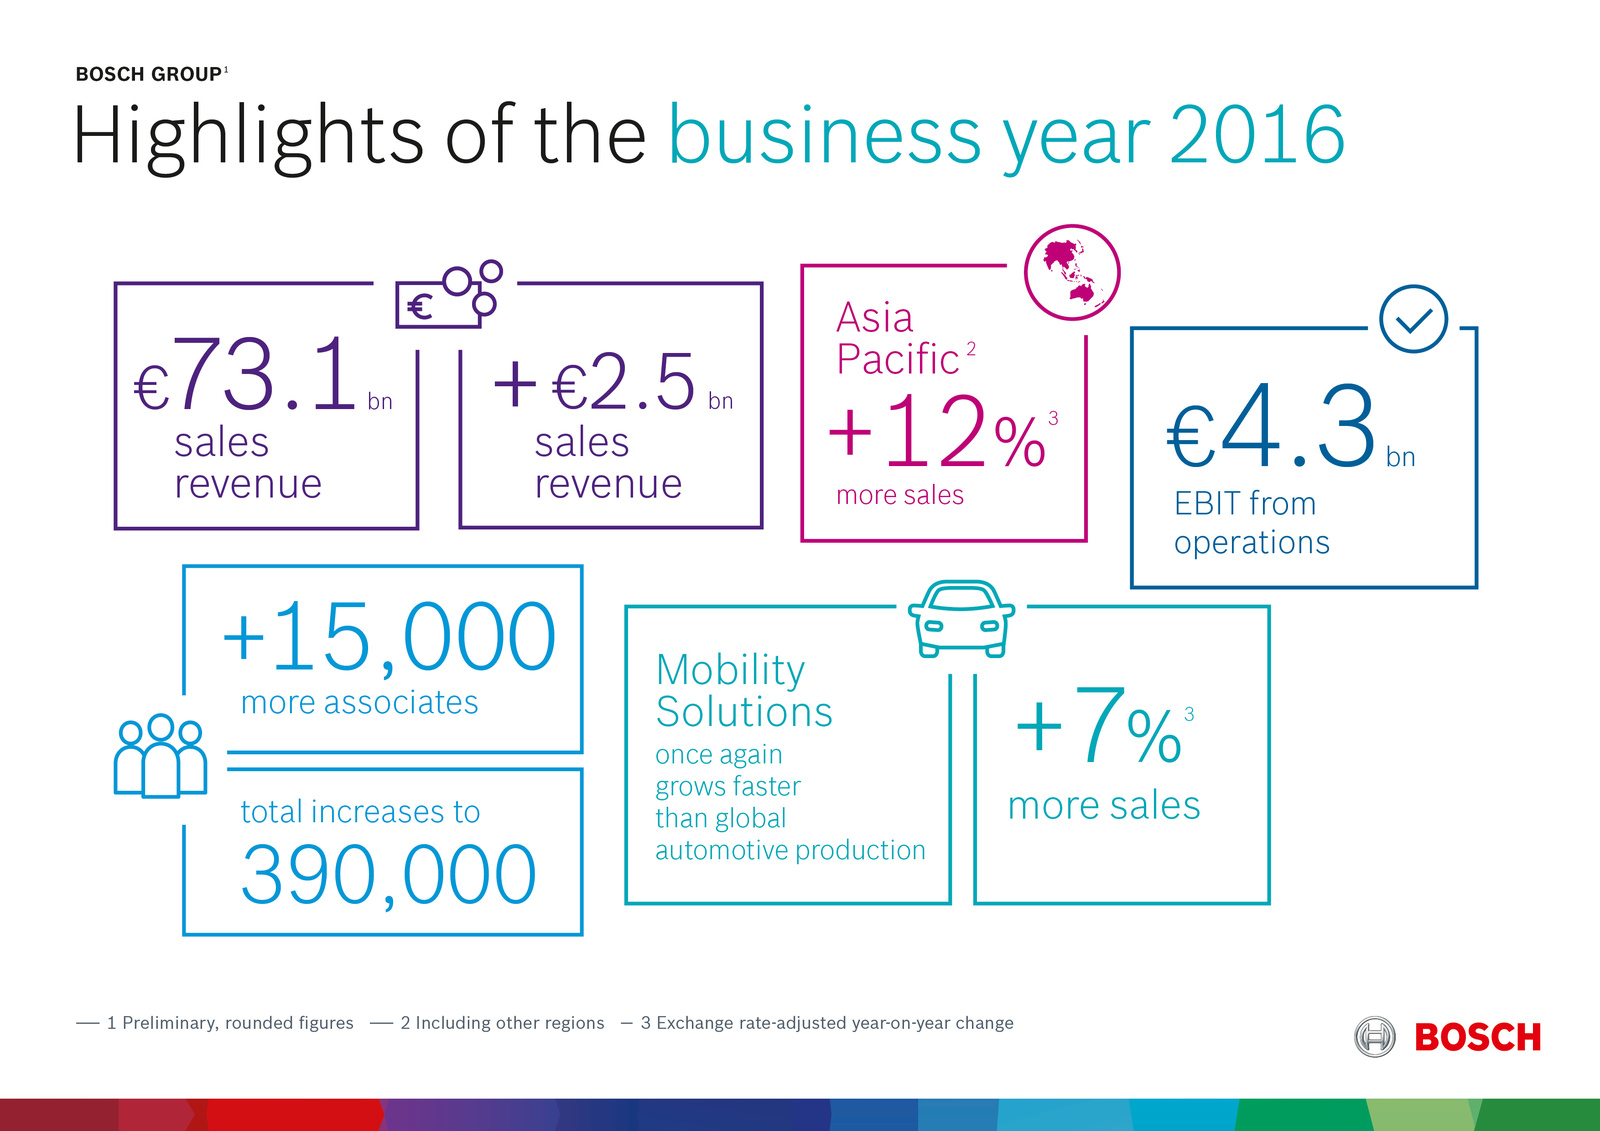 Highlights of the business year 2016